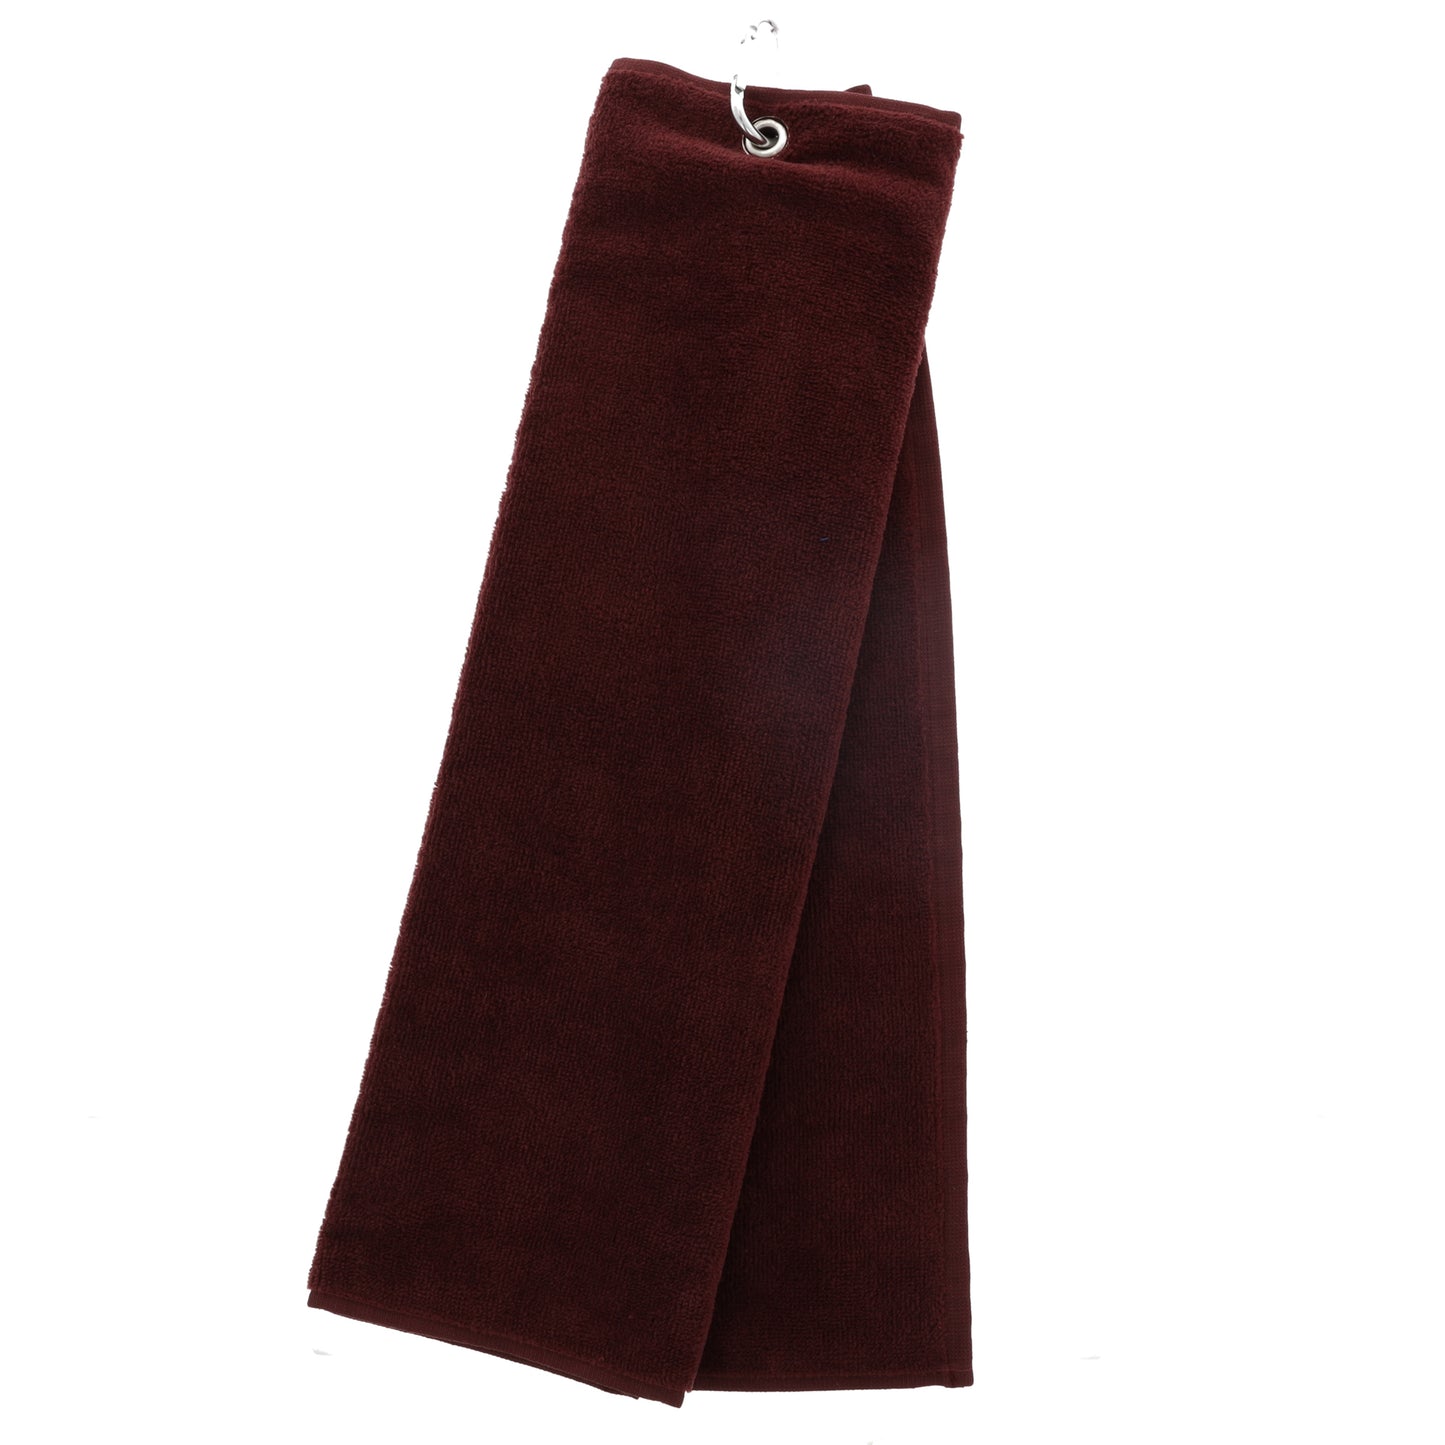 Personalised Embroidered Tri Fold GOLF Towel Trifold Towel with Carabiner Clip  - Always Looking Good - Burgundy (Wine)  